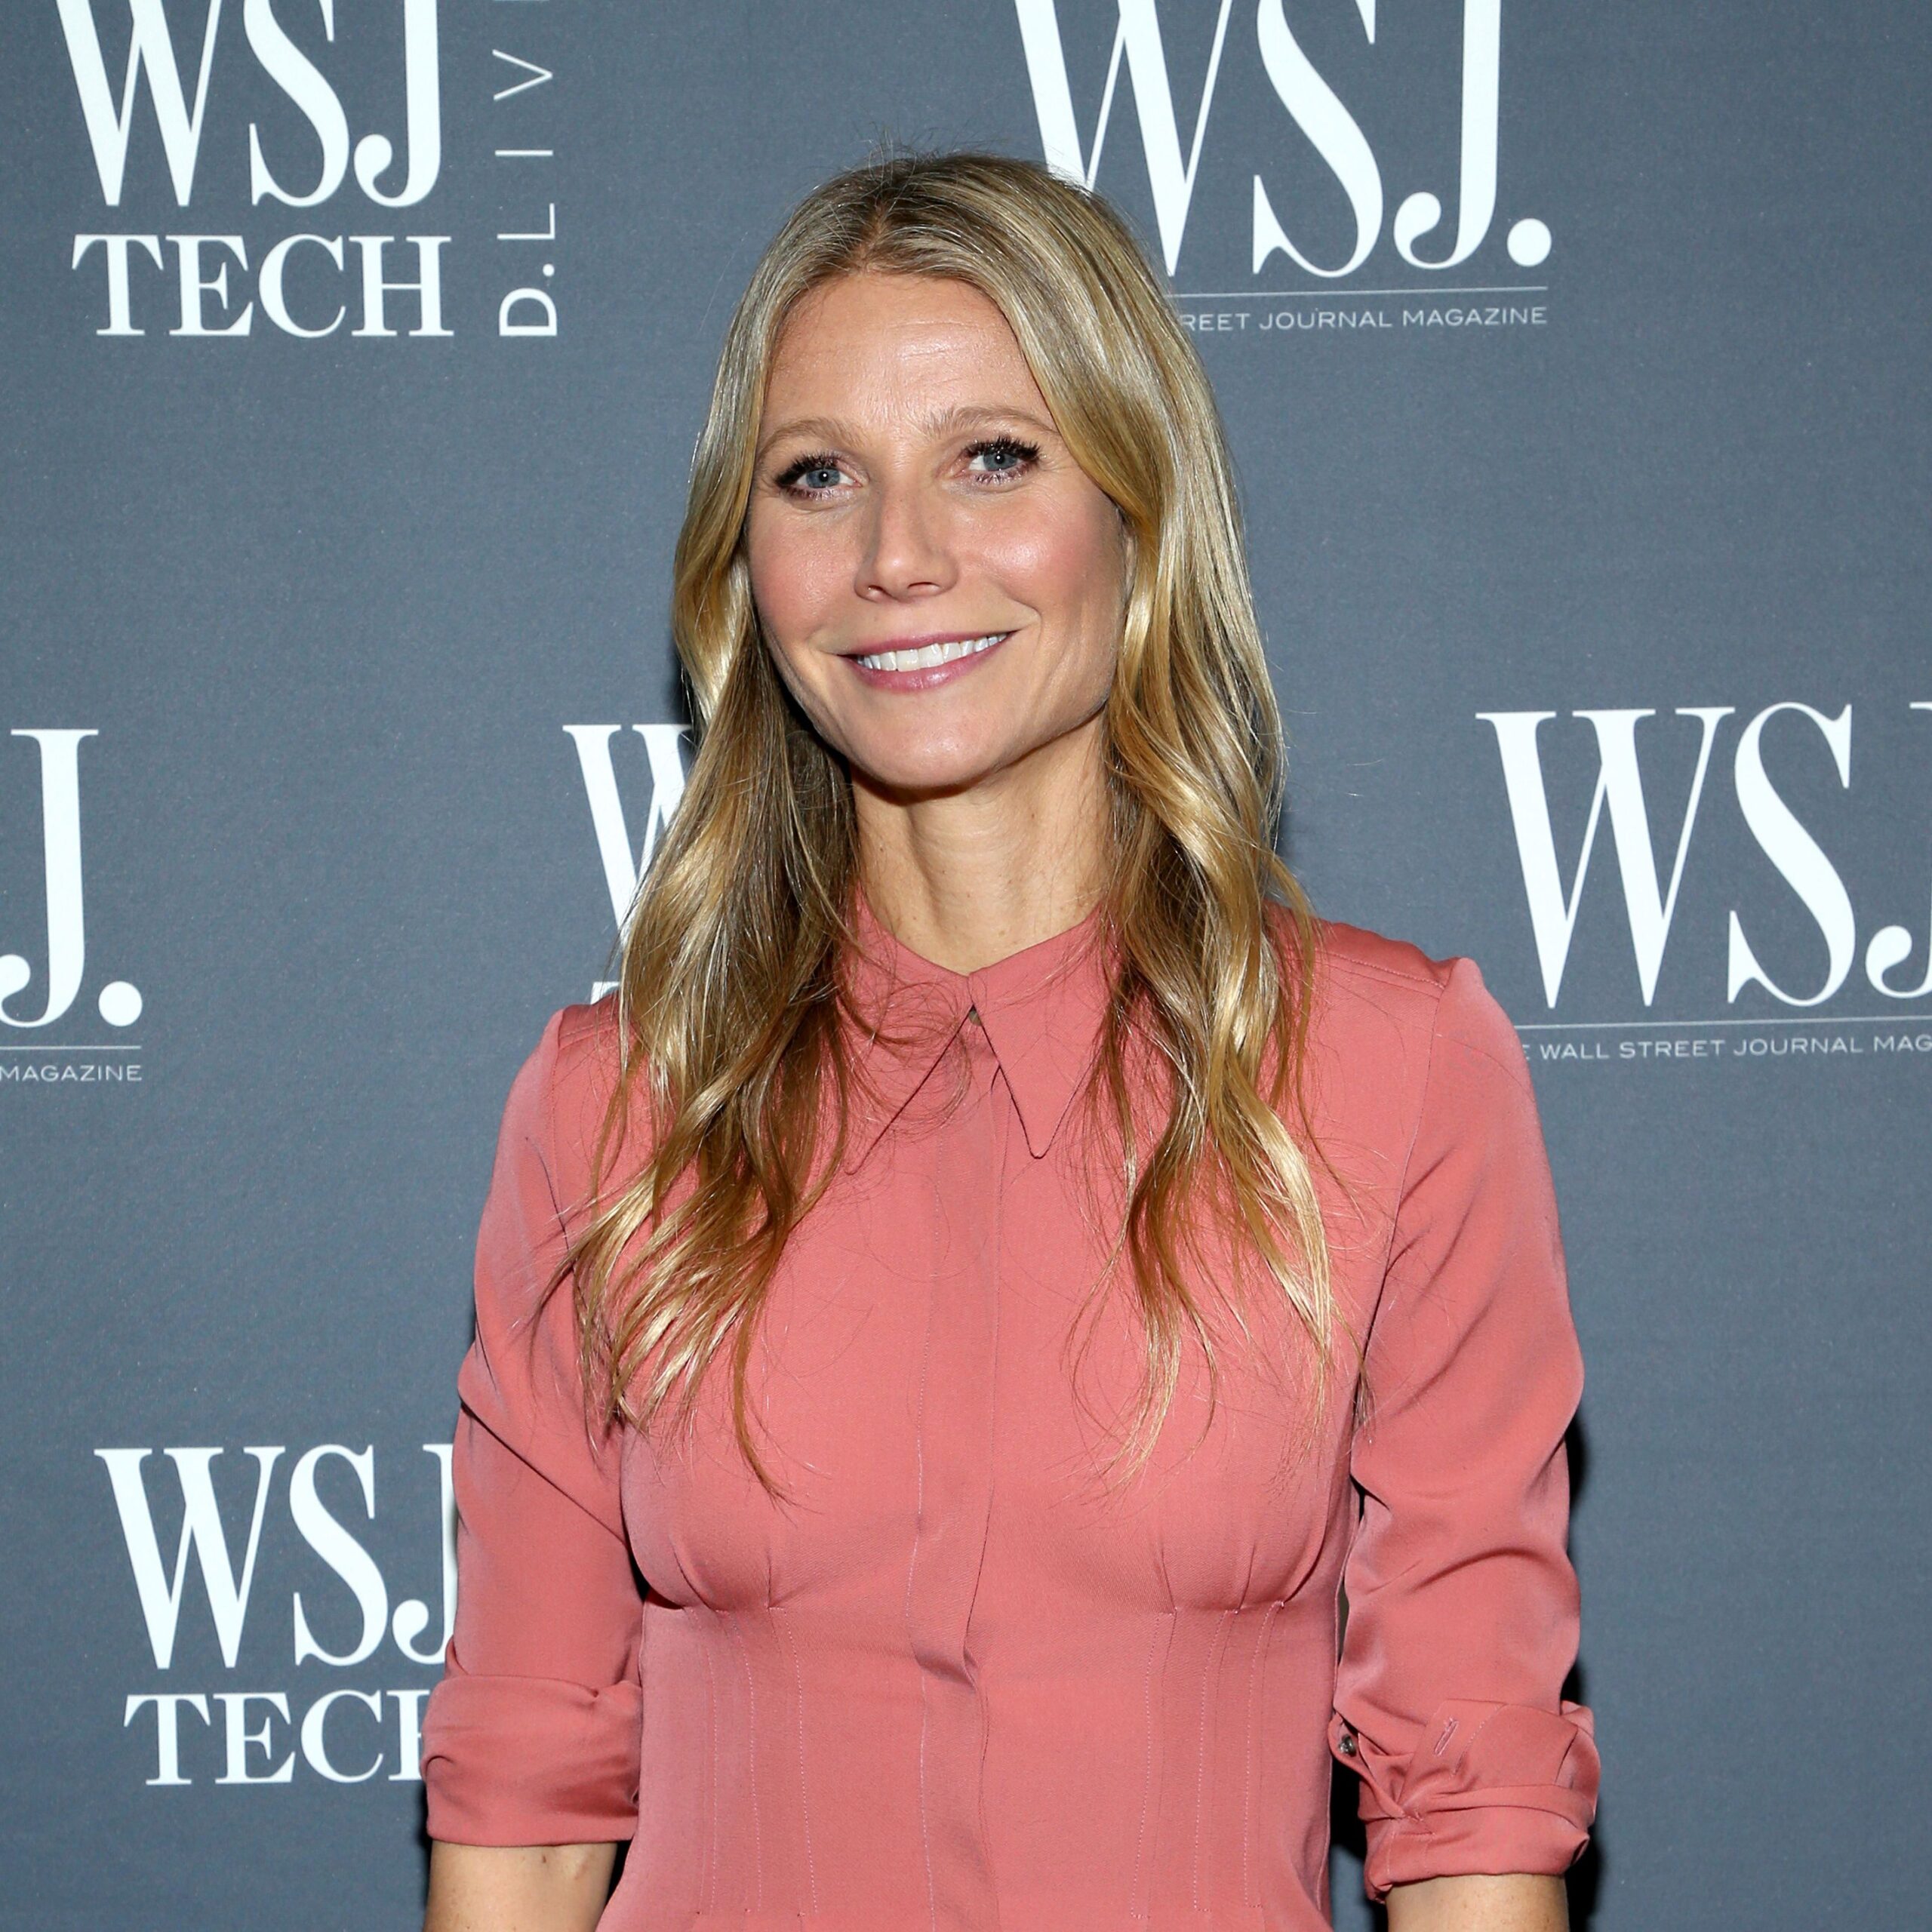 Gwyneth-Paltrow-bought-Boobs-Puzzle-by-Jiggy-for-her-son-just-for-fun-1